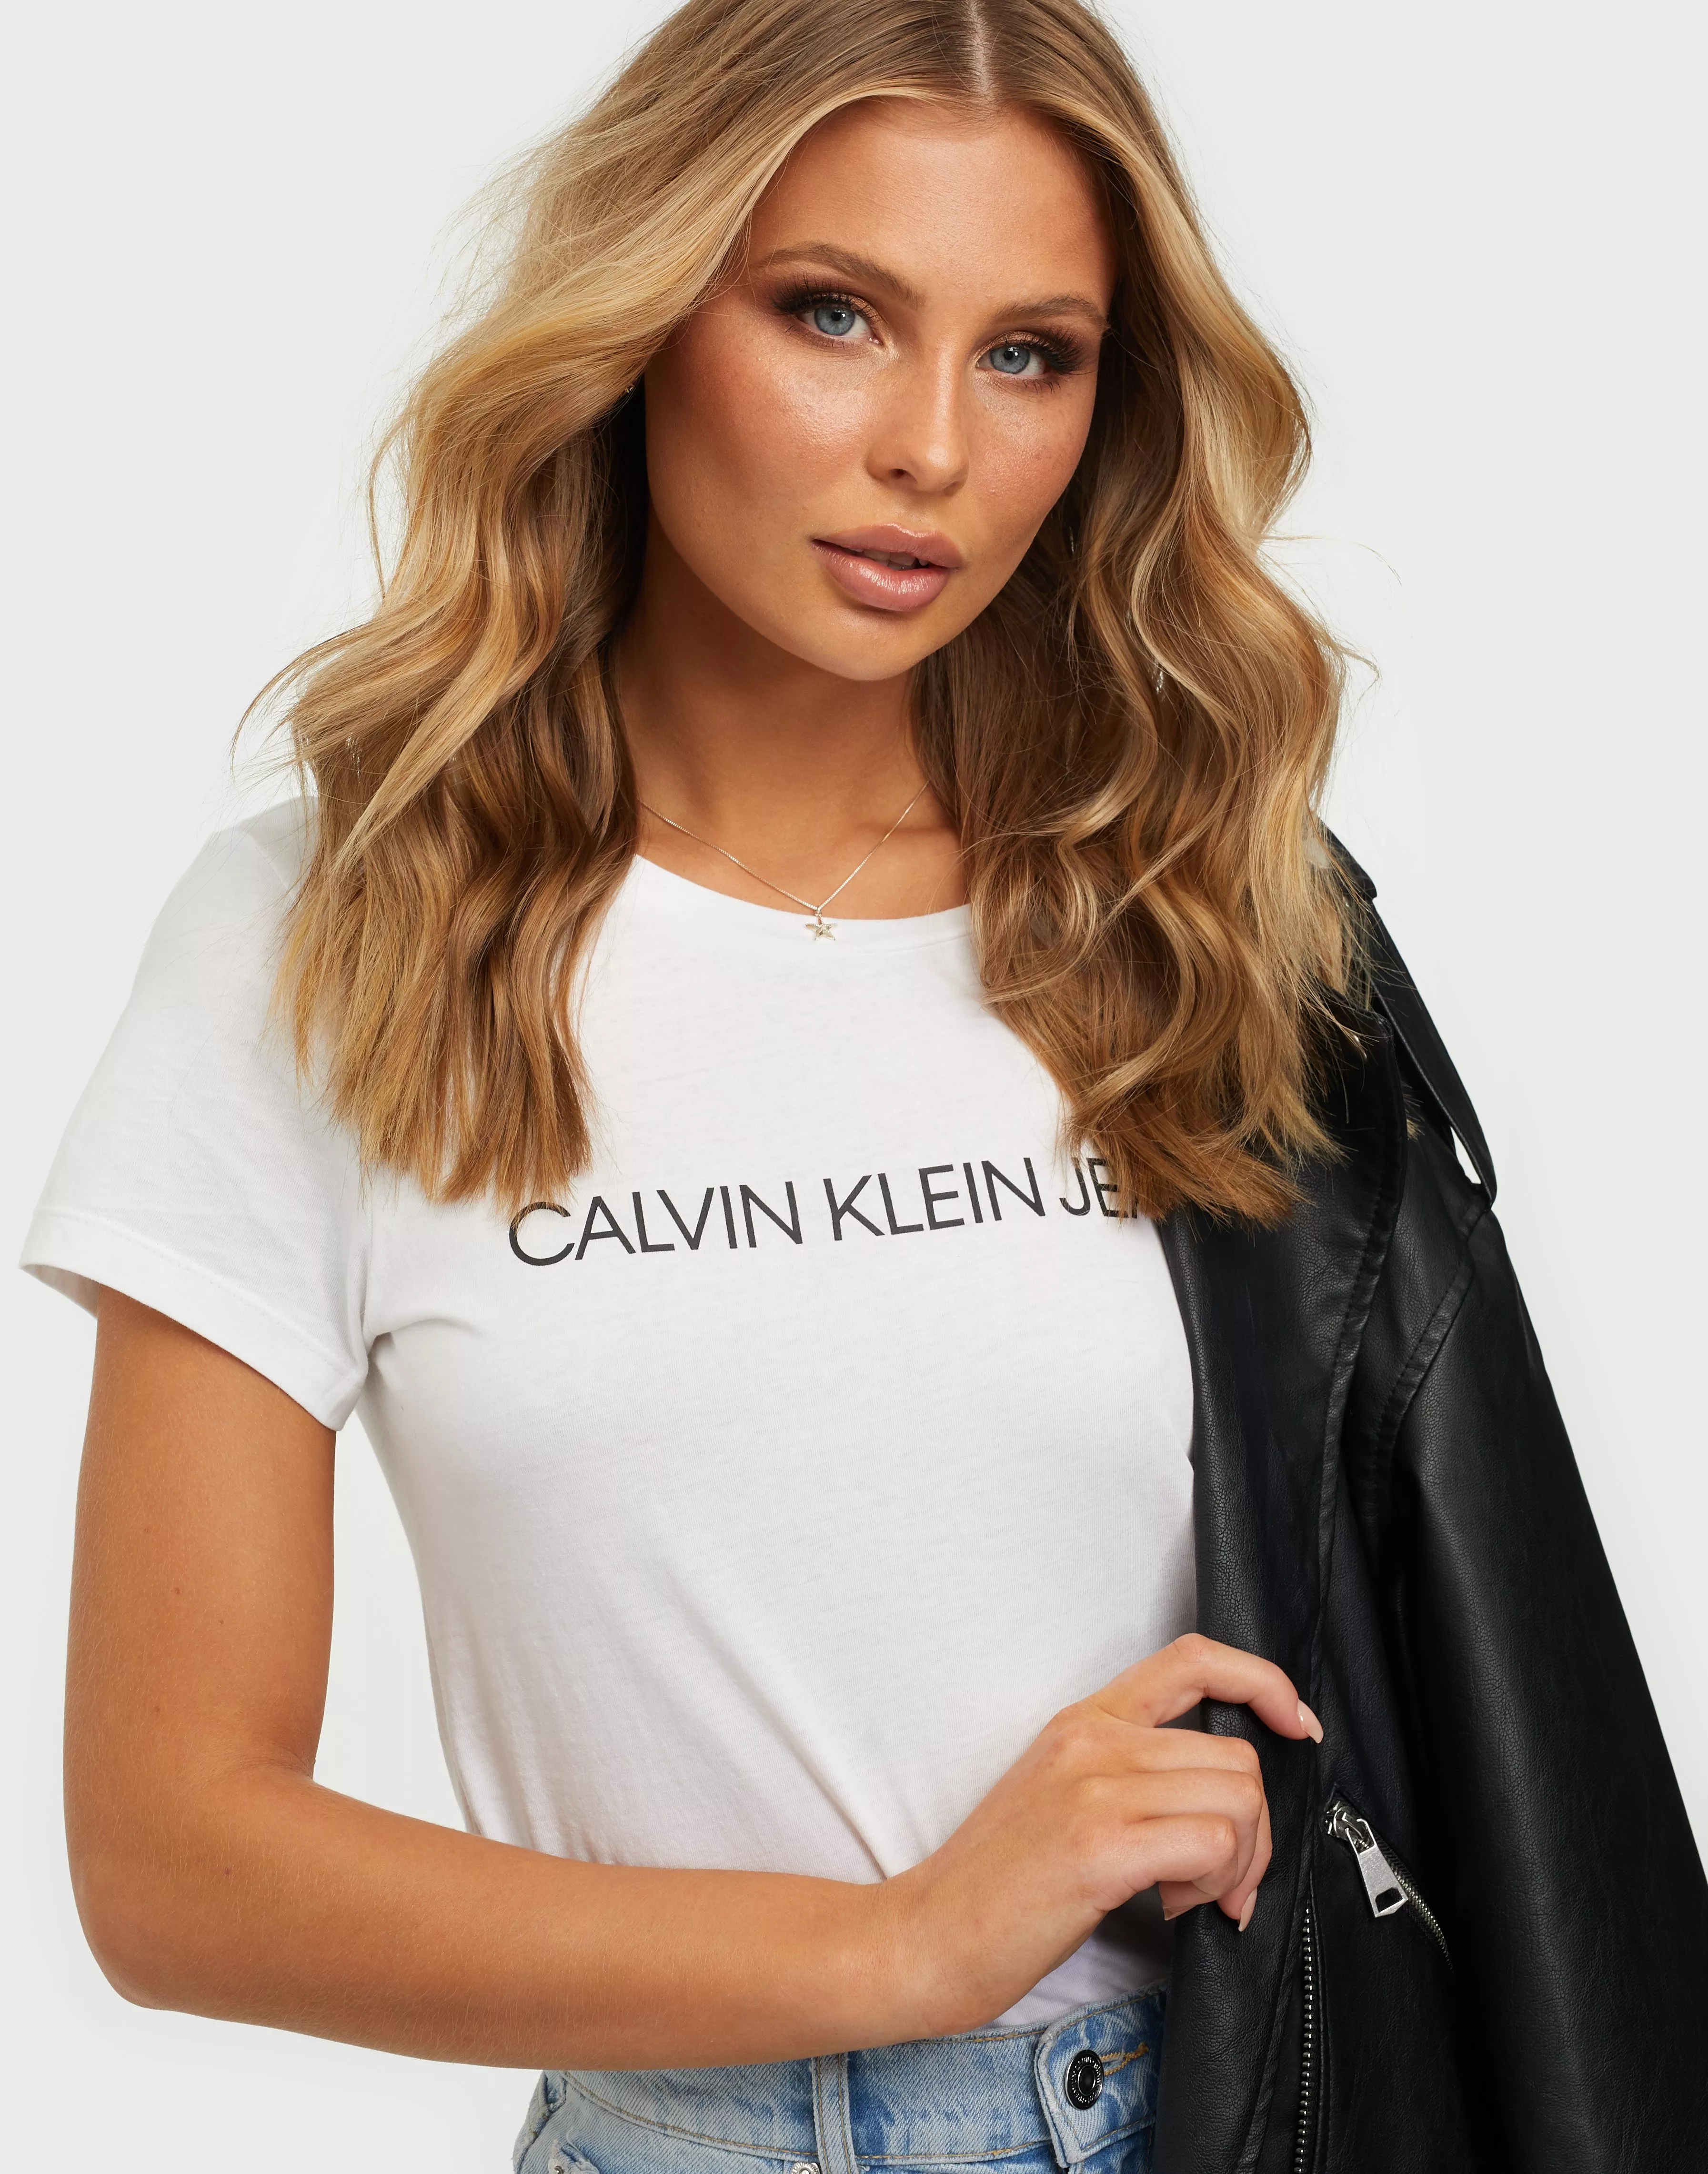 Buy Calvin Klein Jeans CORE SLIM White - INSTITUTIONAL FIT Bright LOGO TEE